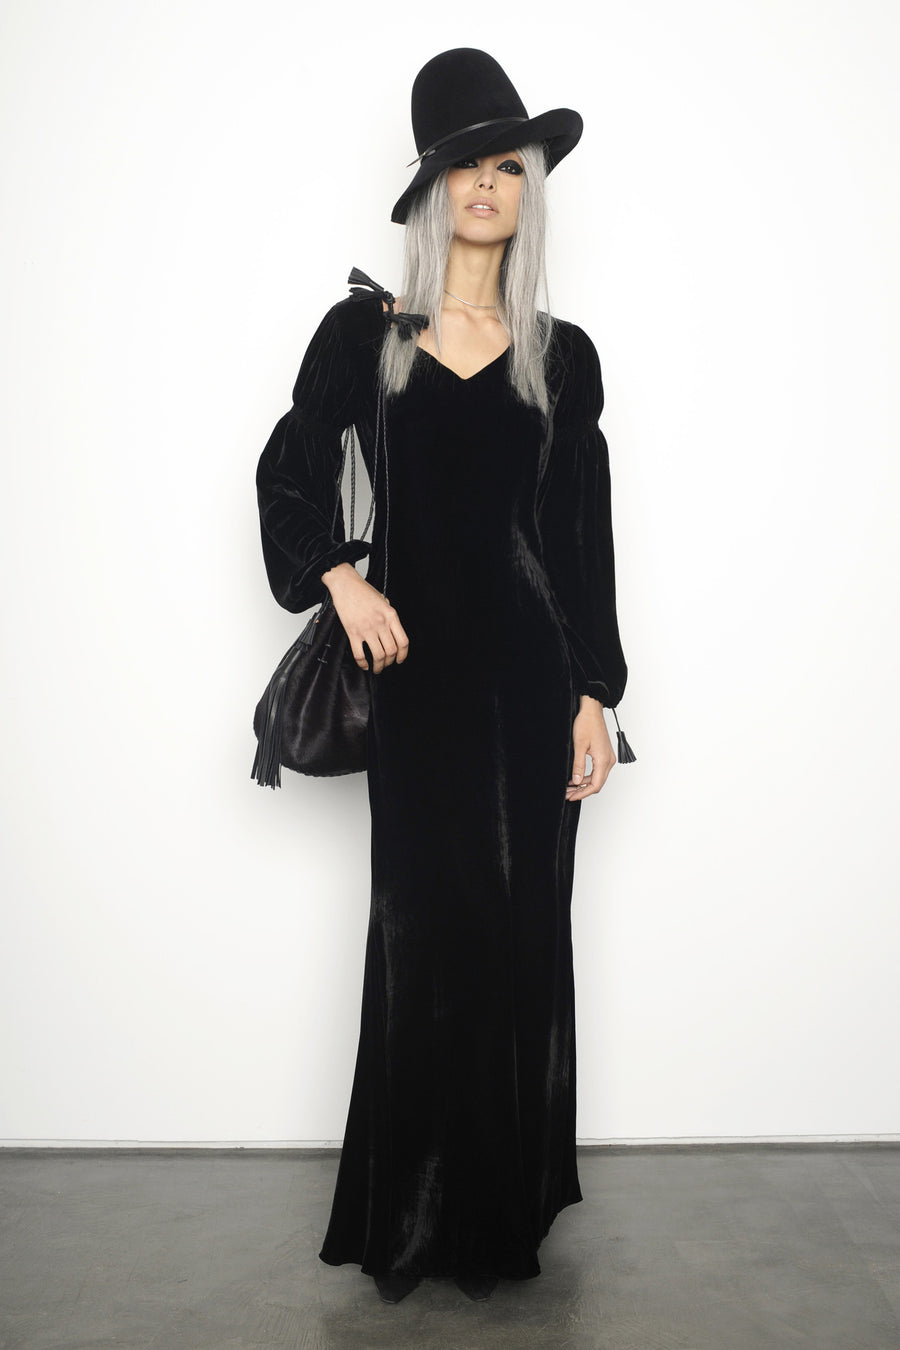 Monic IMG model Wendy Nichol Clothing Fashion Designer Runway Show AW15 Queen of Thieves Black Silk Velvet Dress Renaissance Puff Sleeve Gray Grey Hair Girl Gangster Peaky Blinders Handmade in NYC Custom Tailoring Color Fabric Made to Measure 